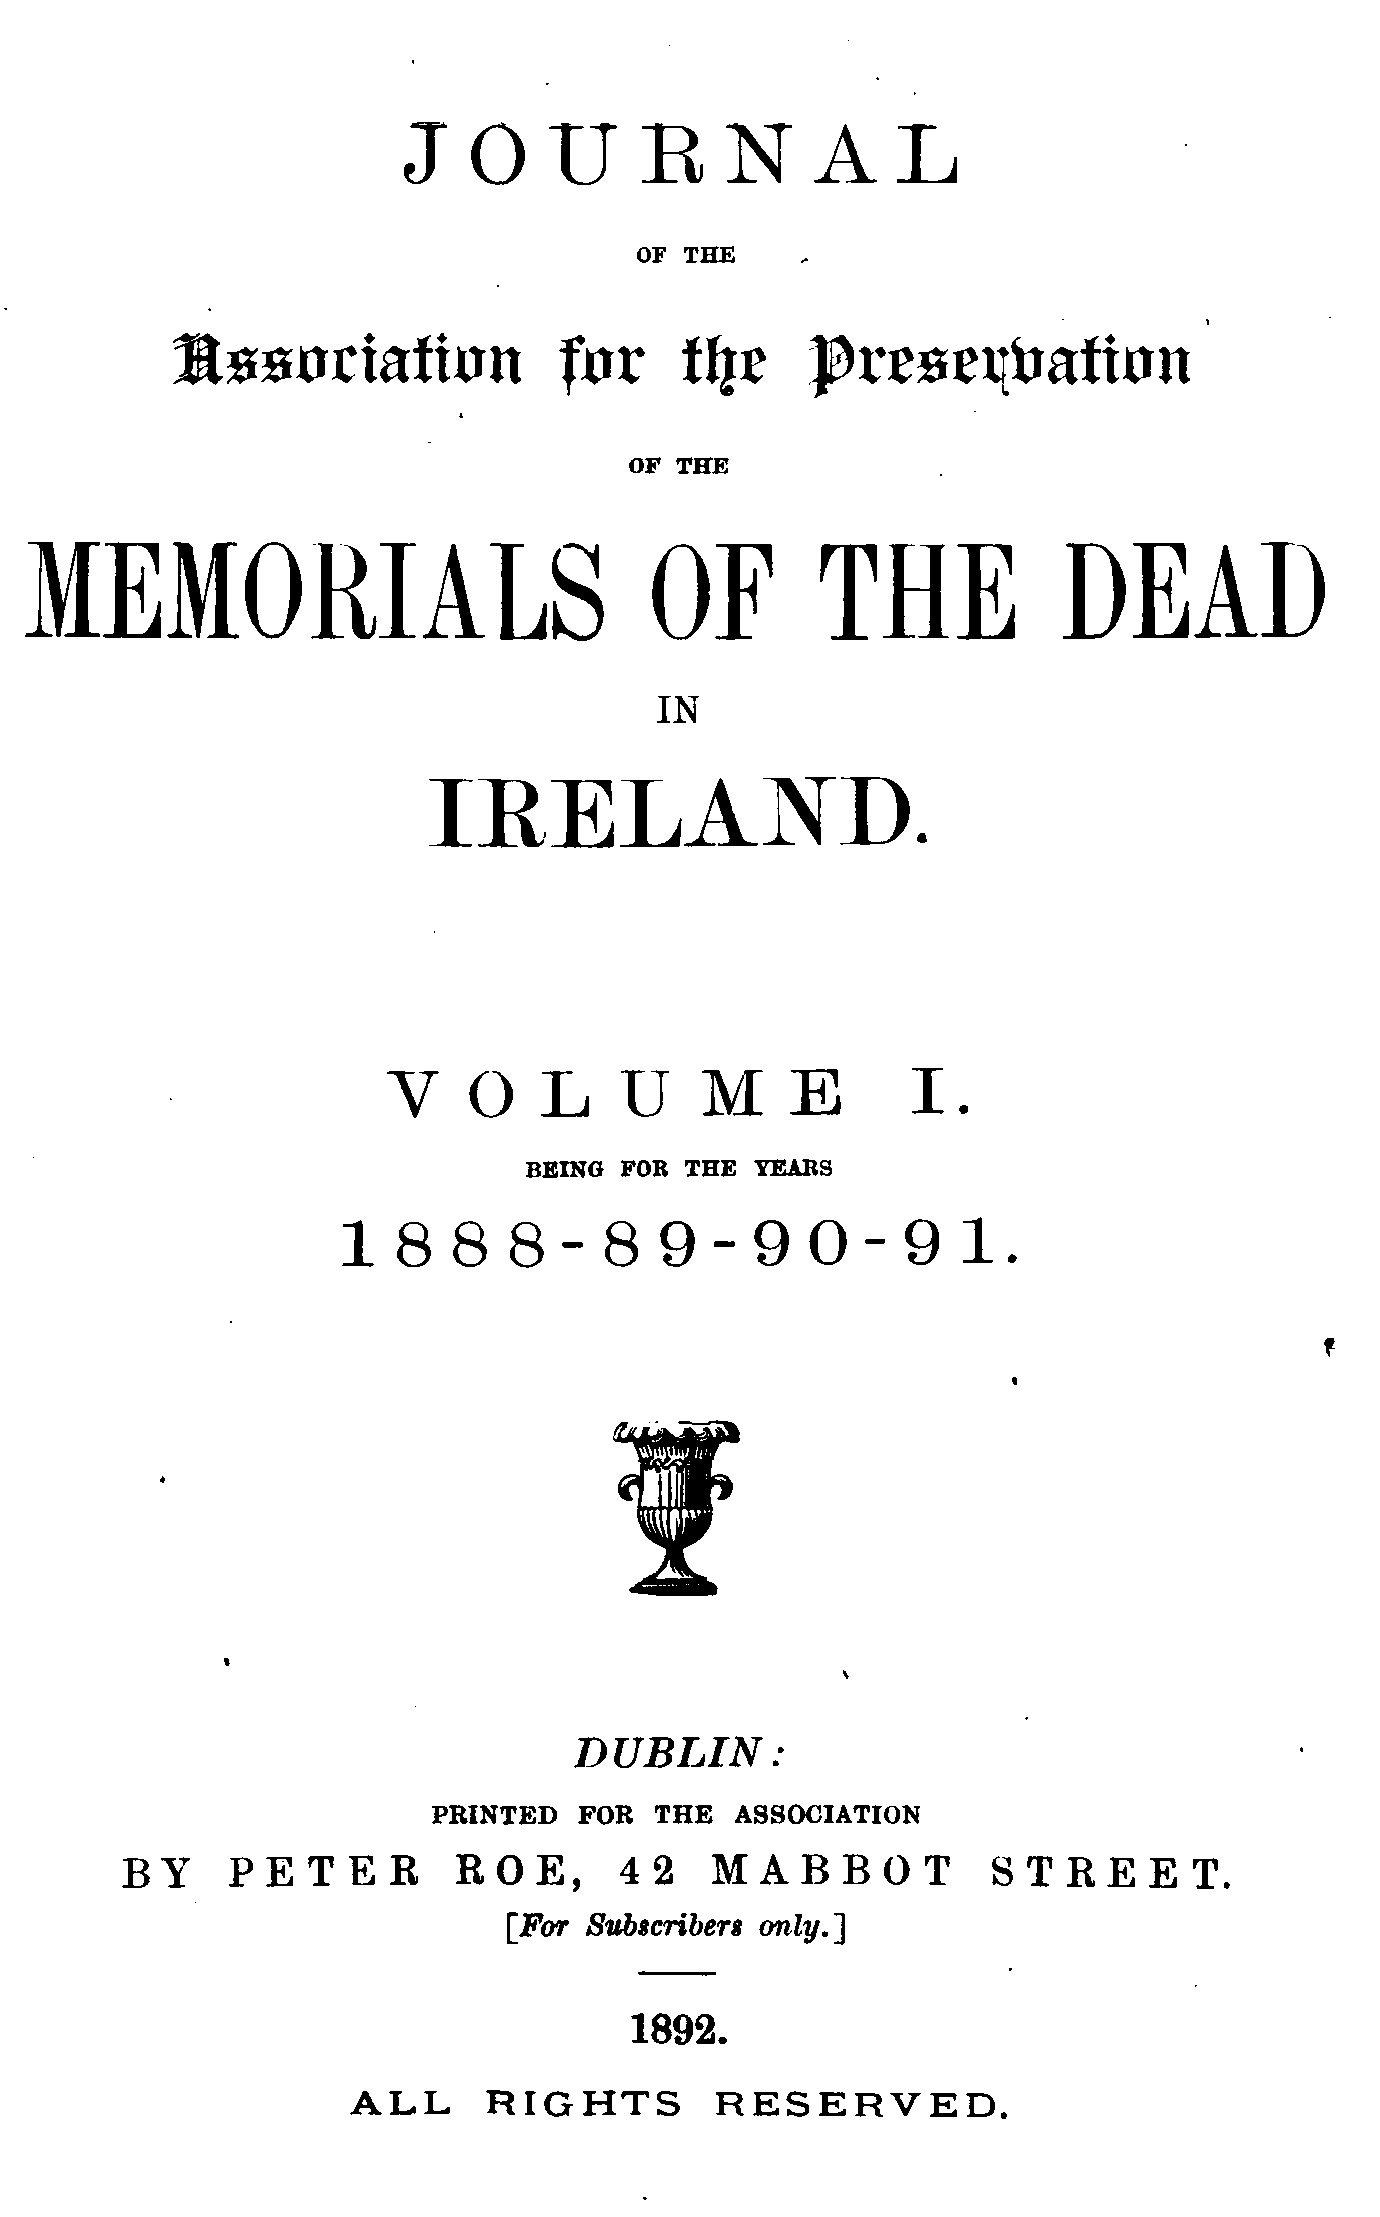 The Journals of the Association for the Preservation of the Memorials of the Dead